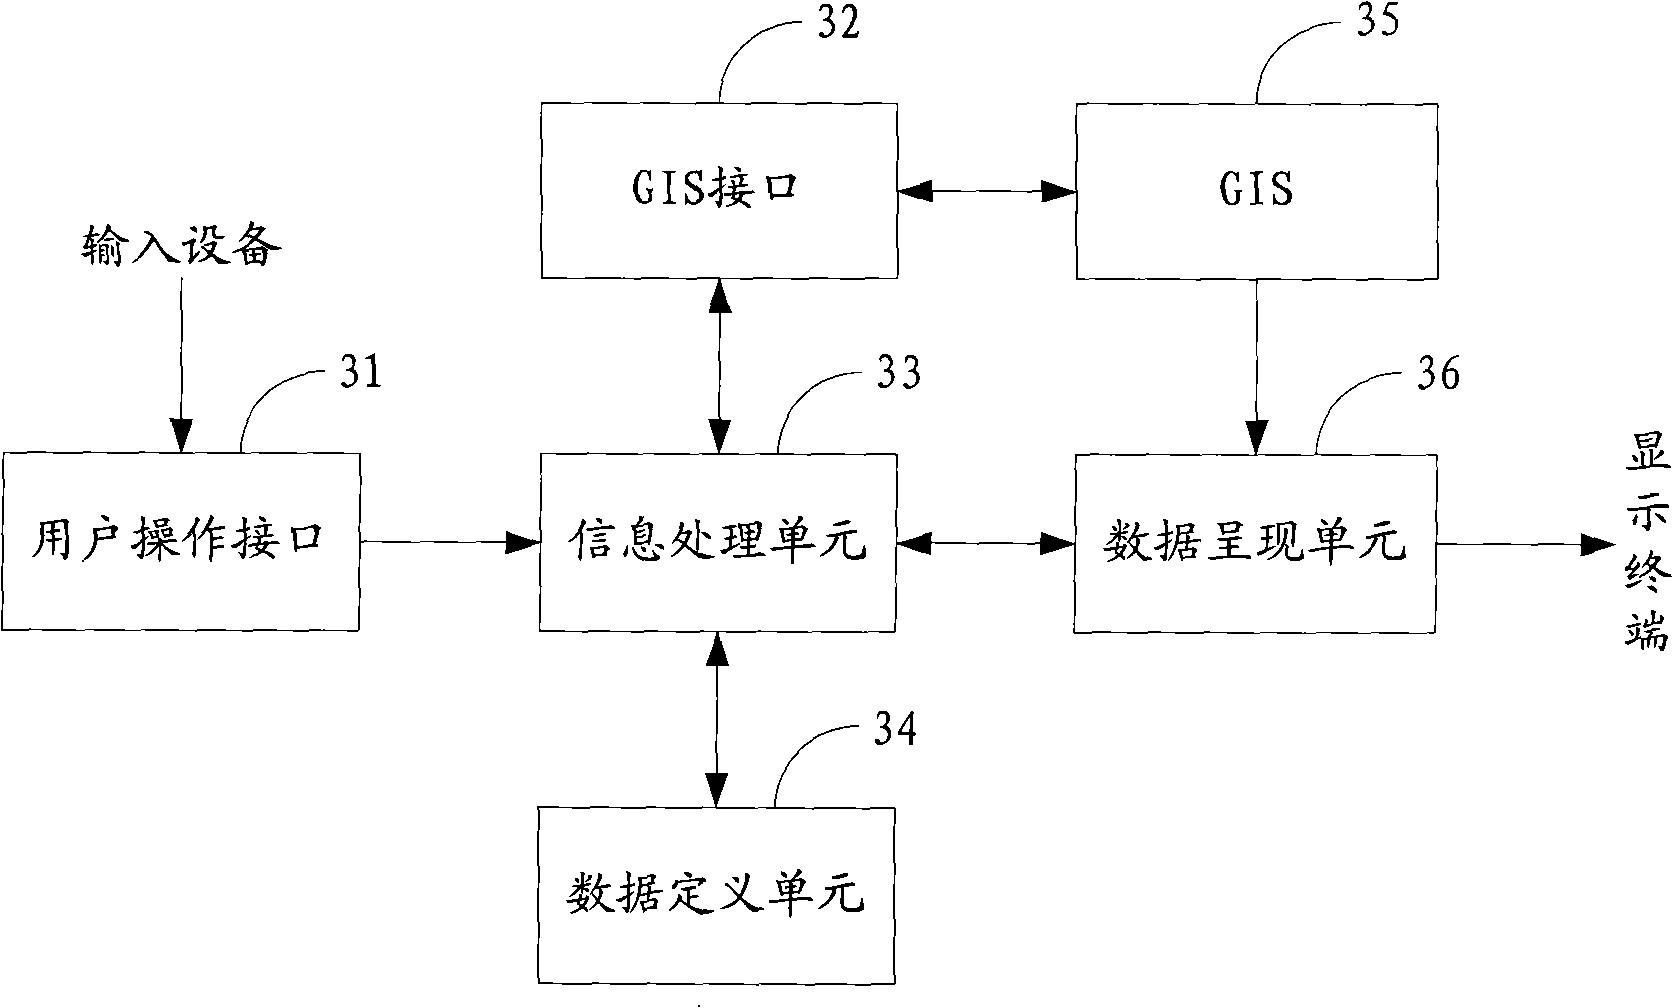 Method and system for presenting network topological structure based on GIS